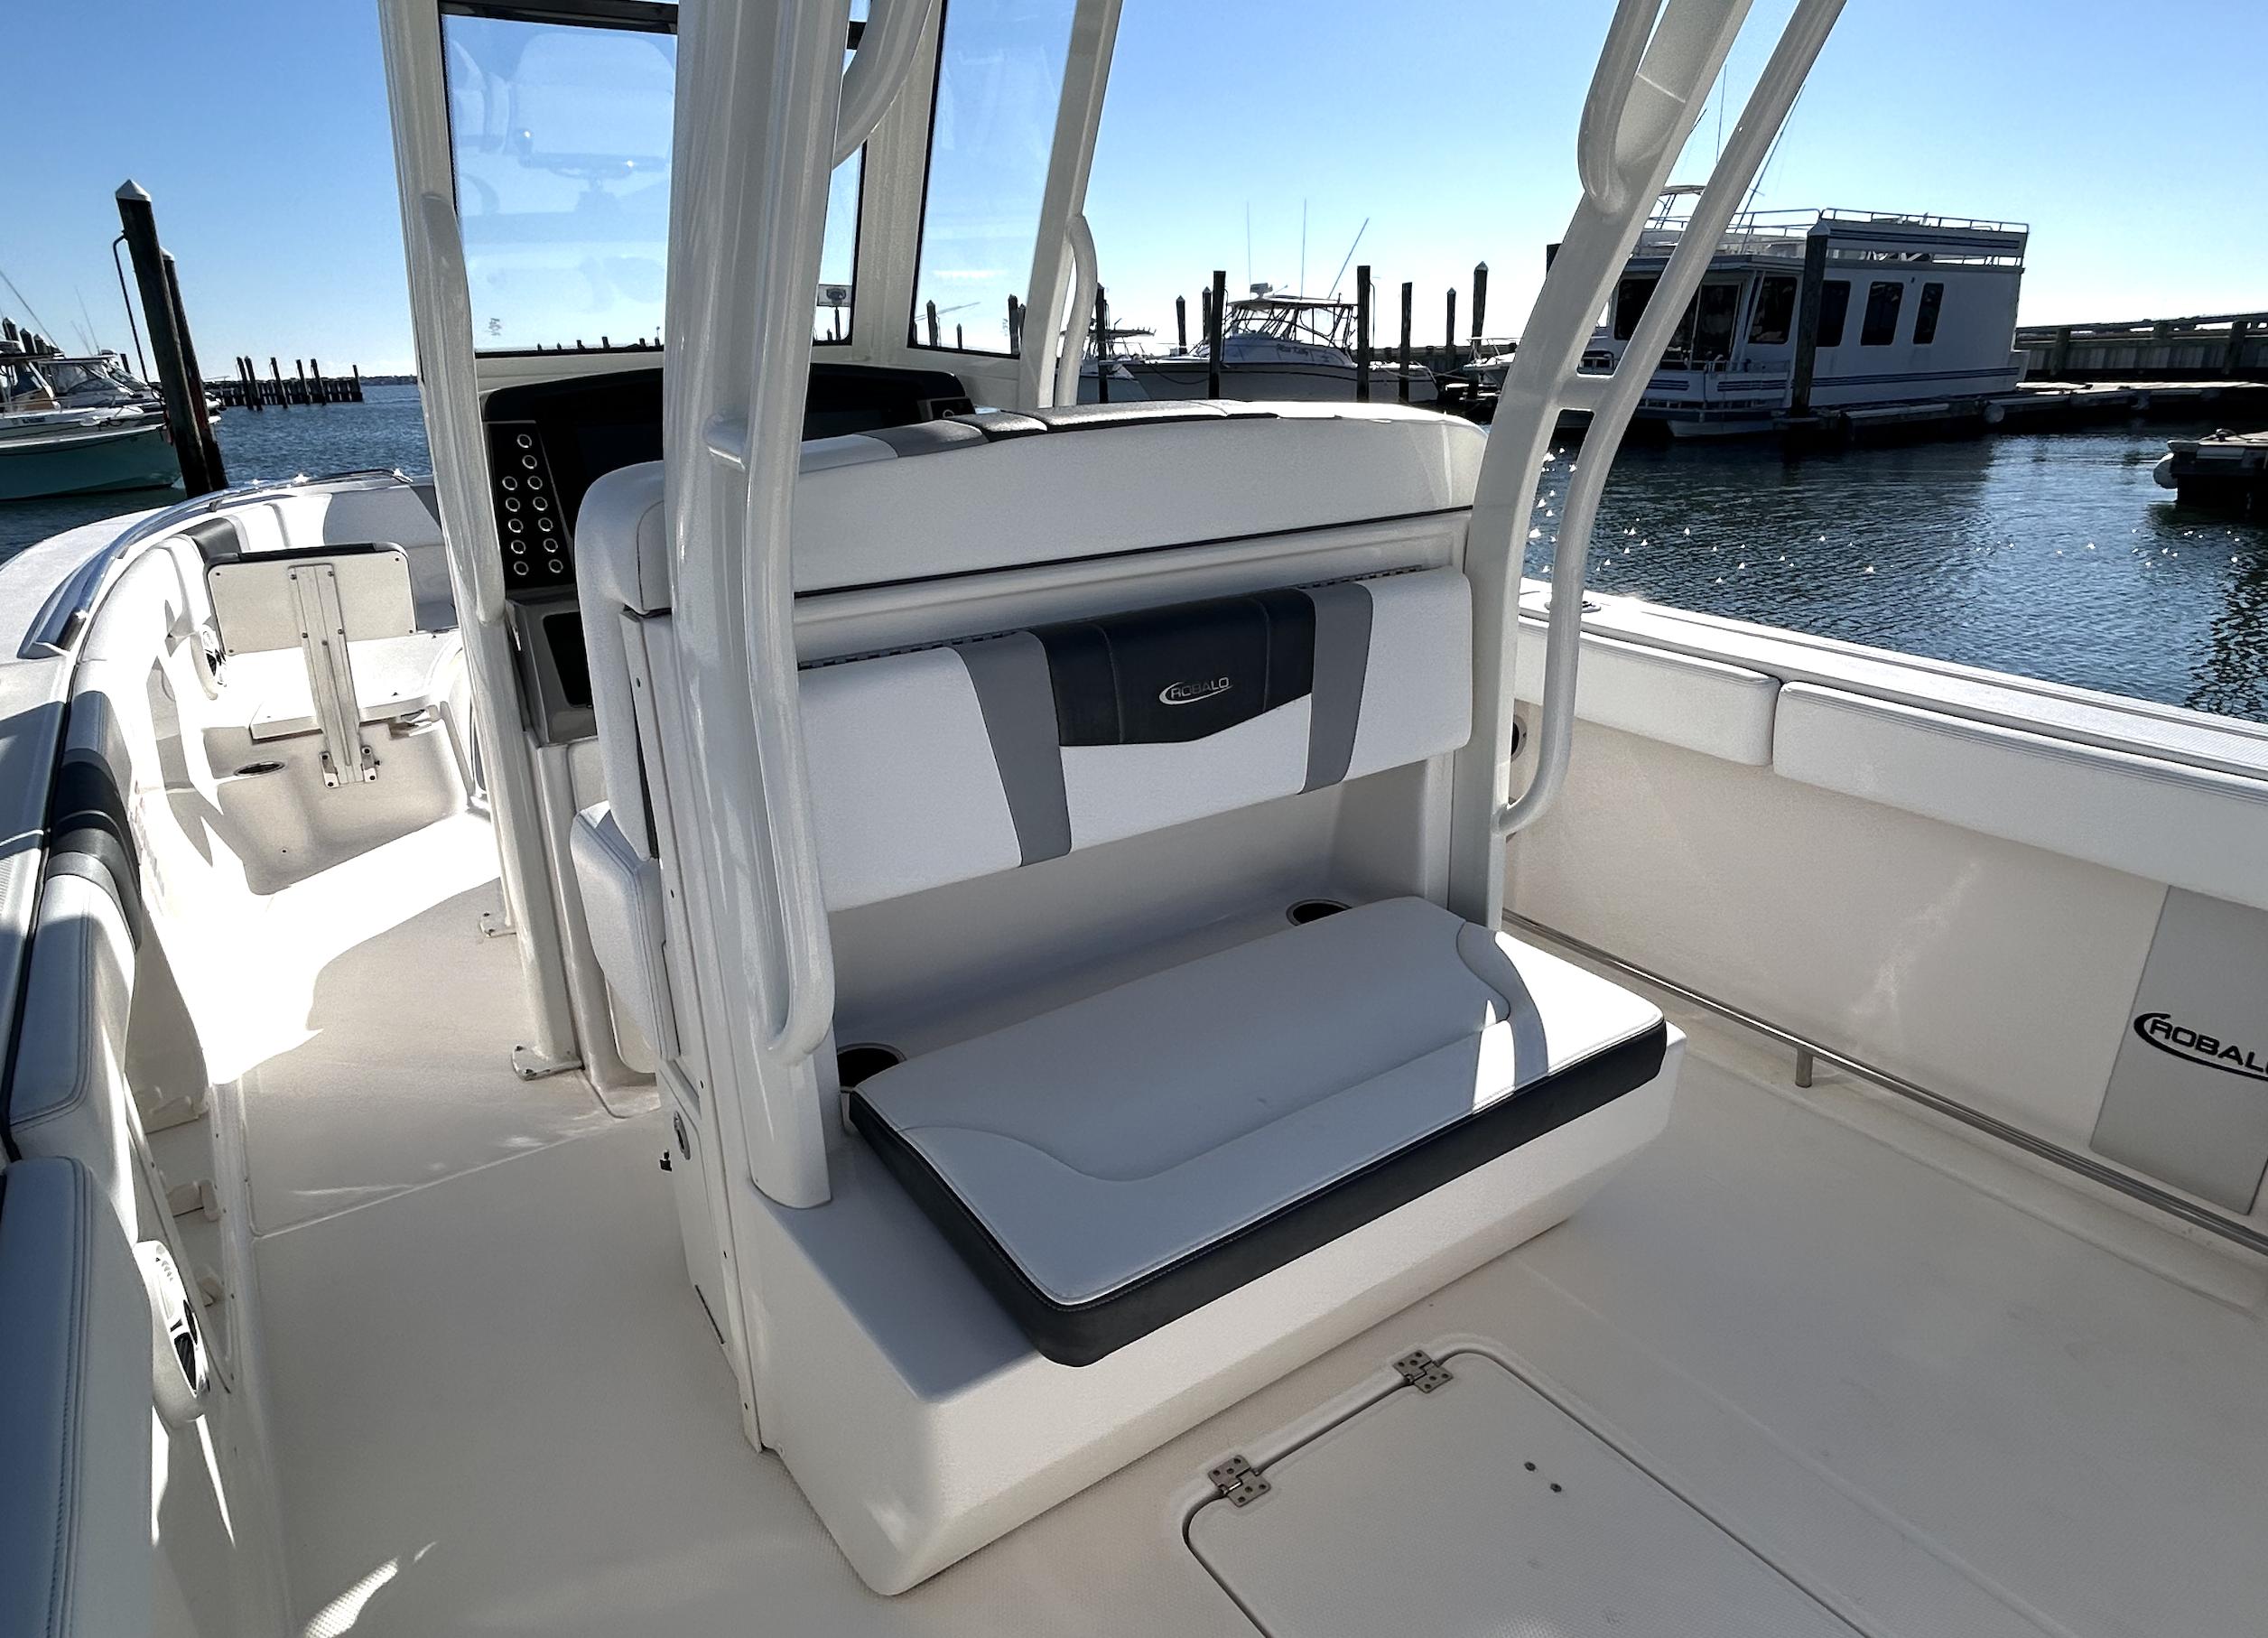 2019 Robalo r272 Center Console for sale - YachtWorld